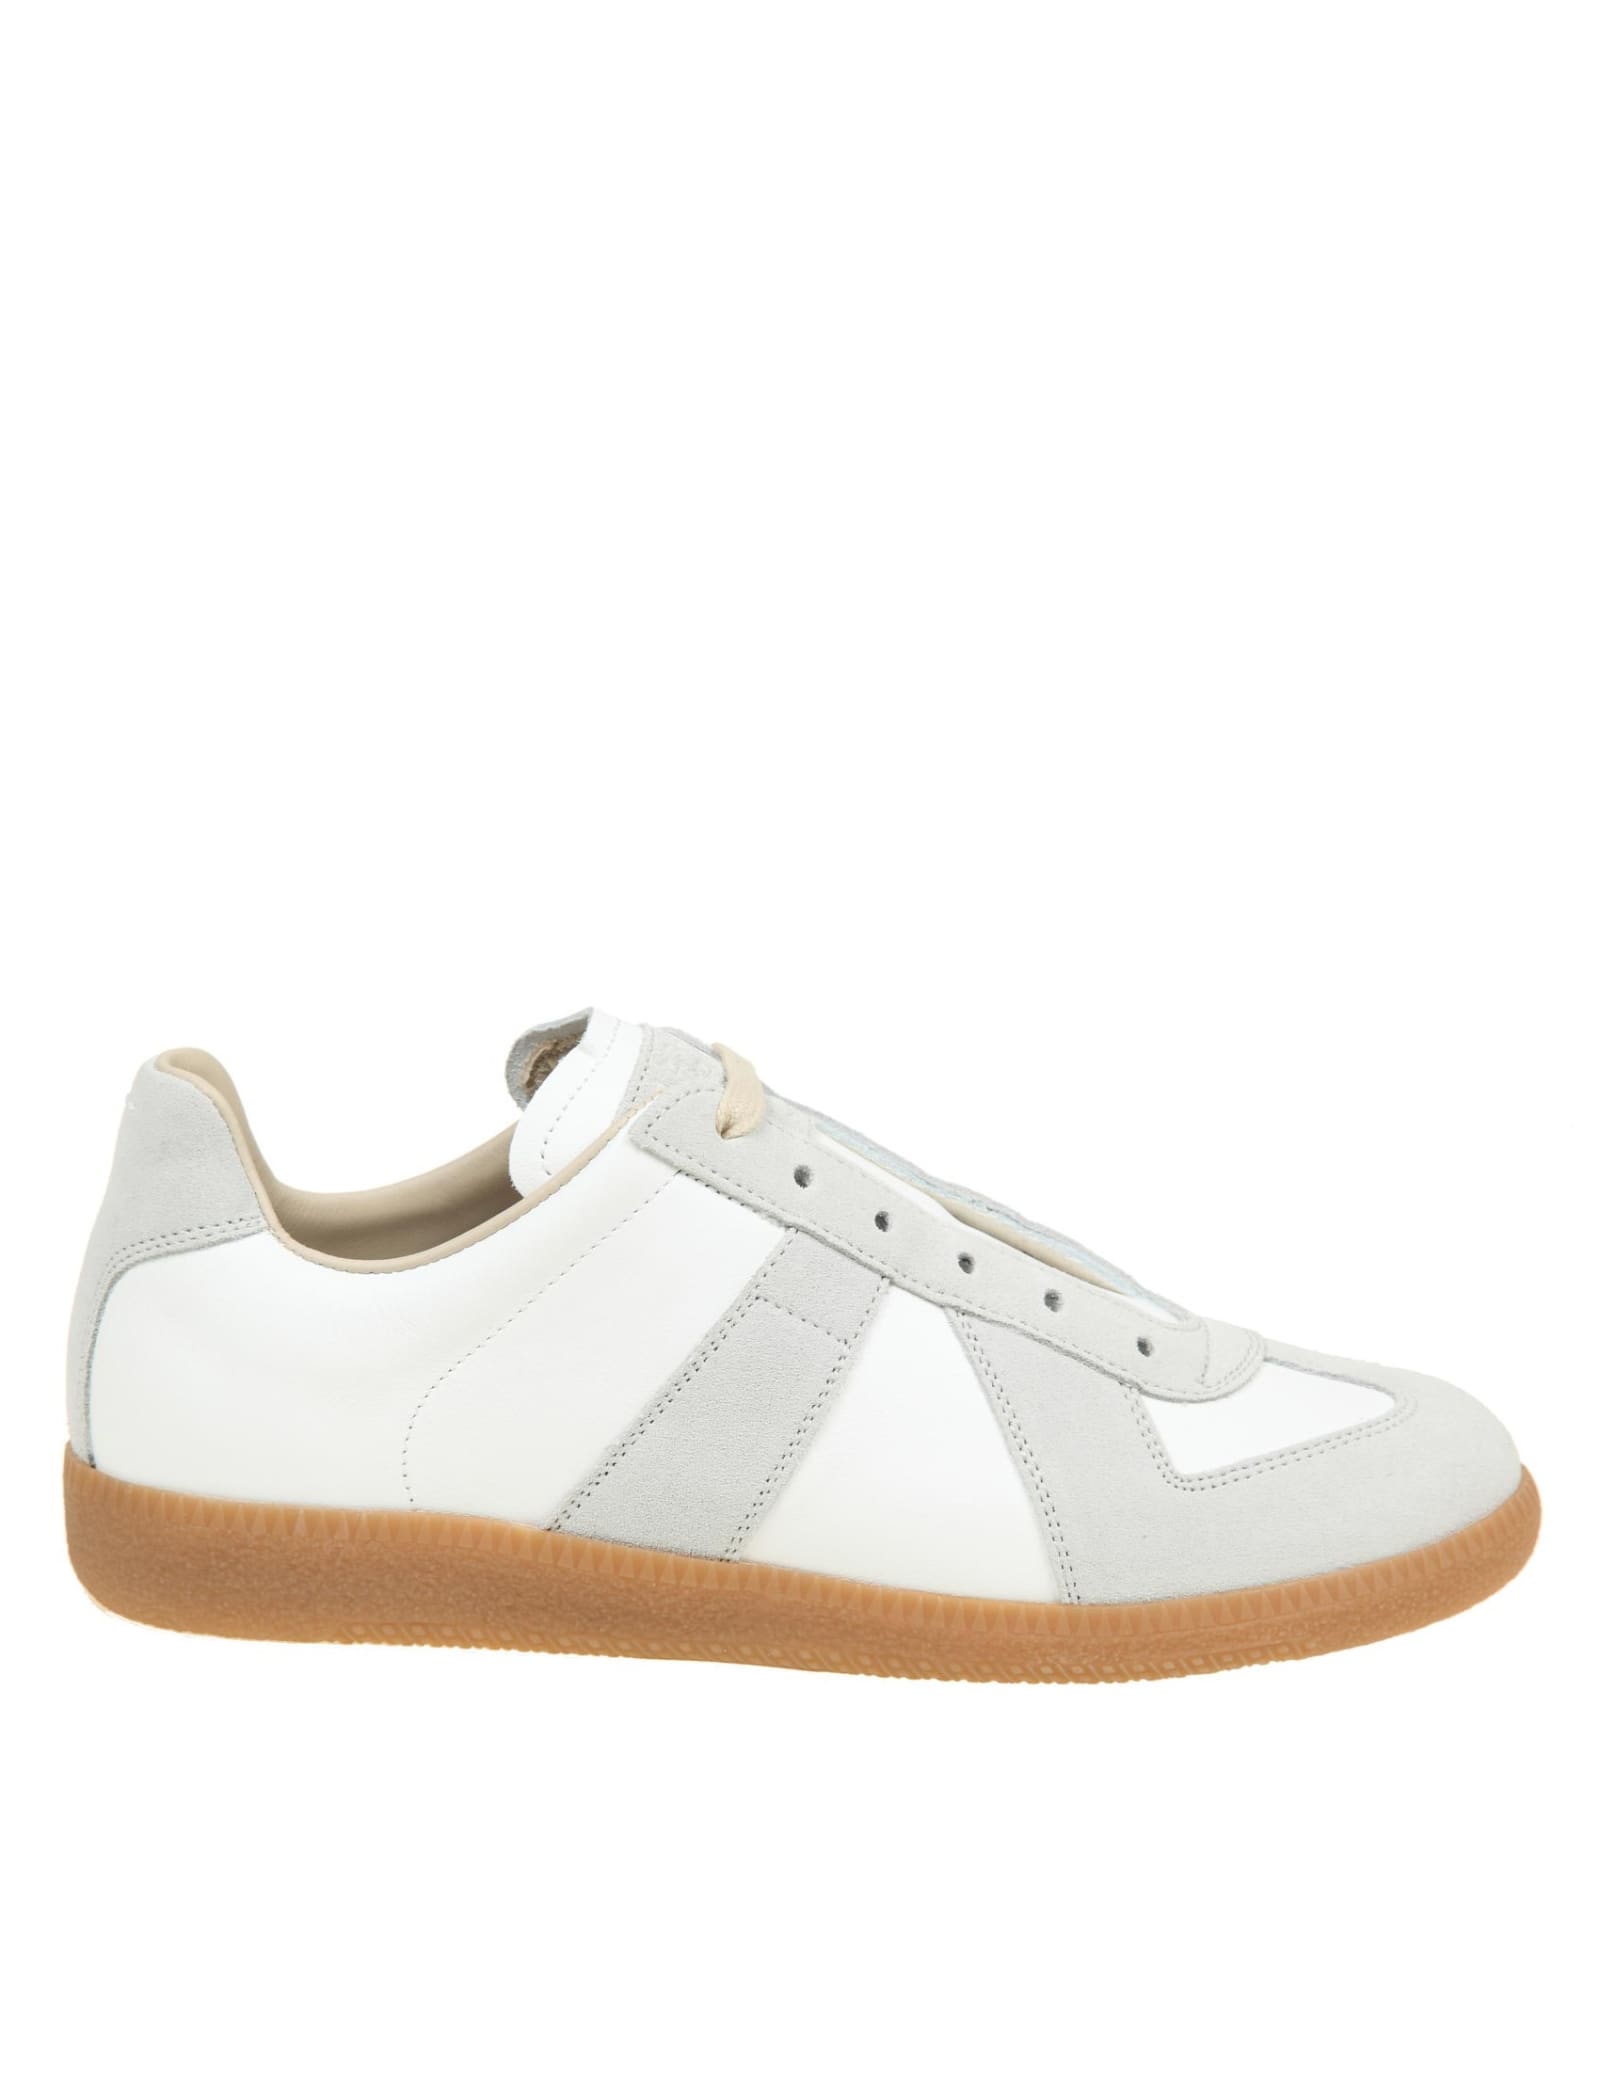 Maison Margiela Project Cl 0 Sneakers In White Leather | Coshio Online Shop